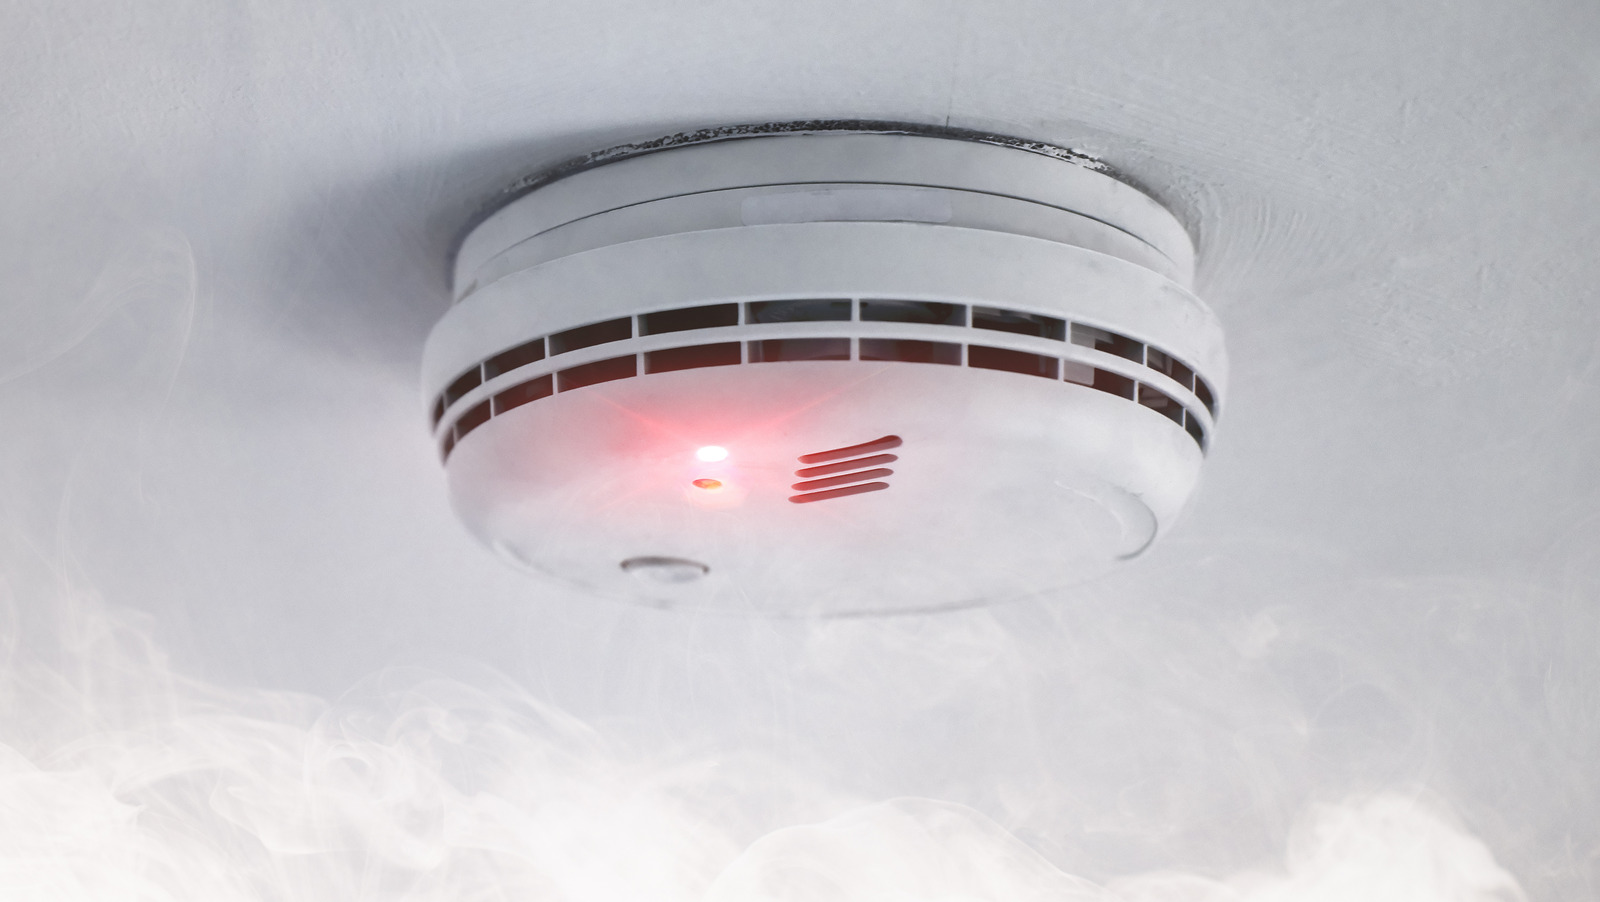 Why Does A Smoke Detector Chirp?